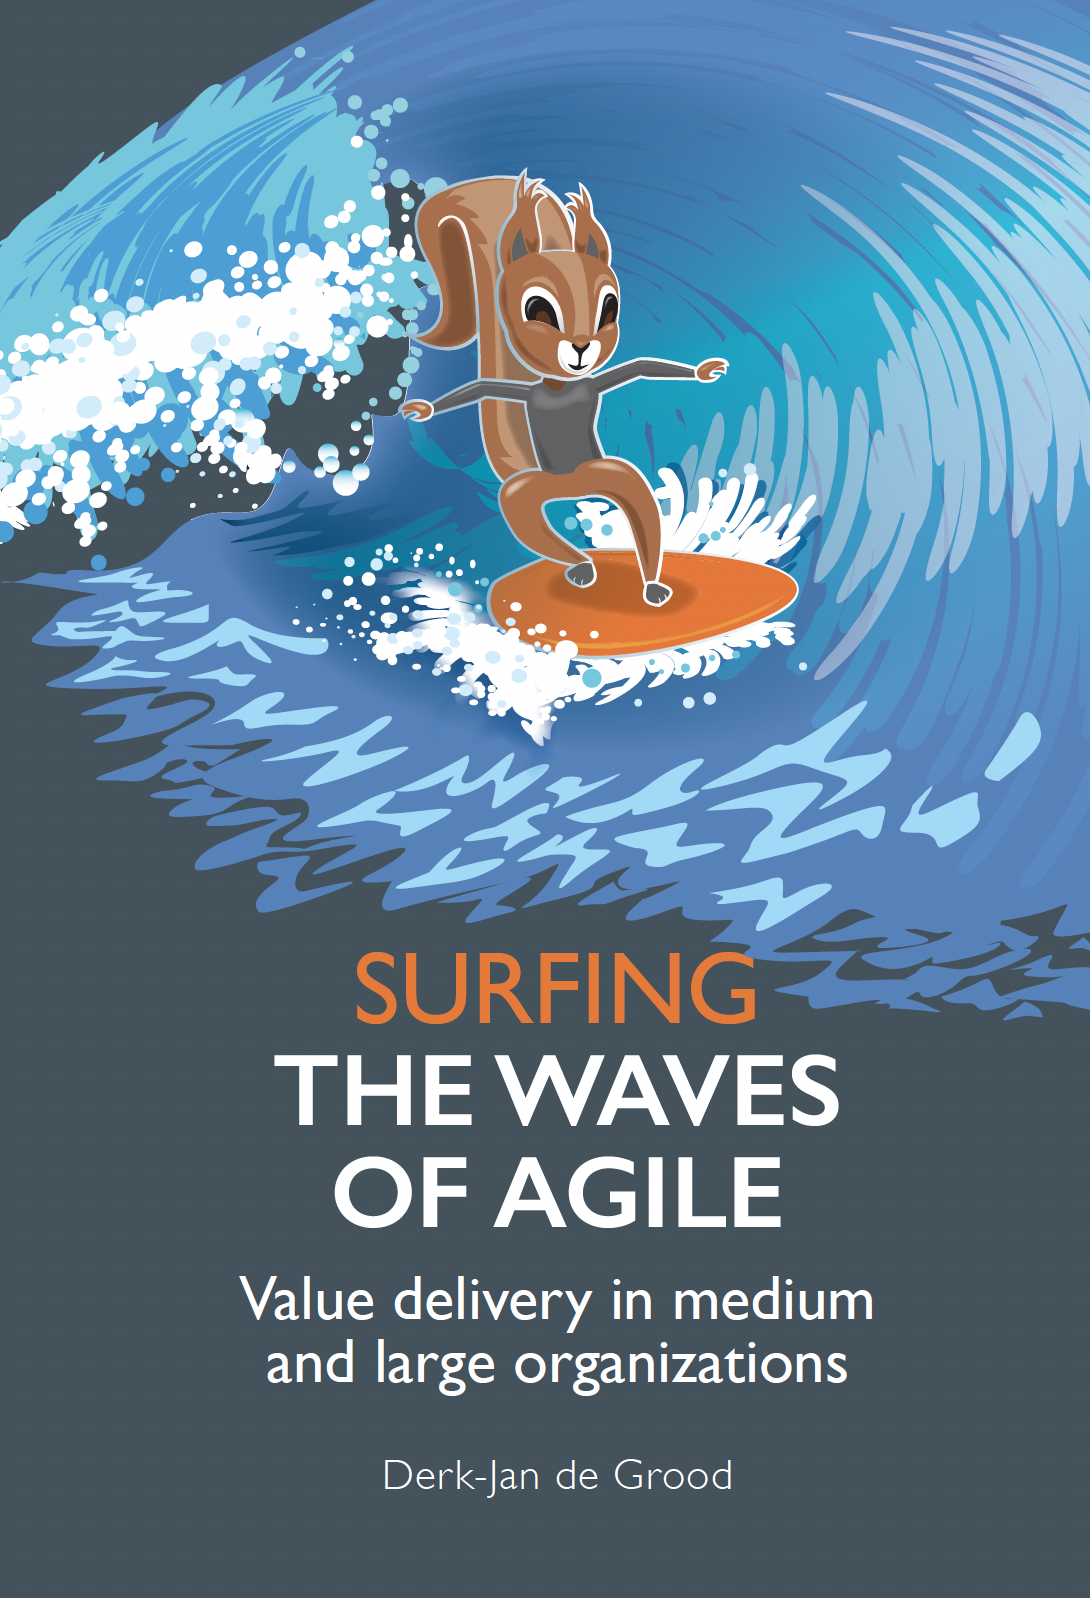 The waves of Agile: Value delivery in medium and large organizations